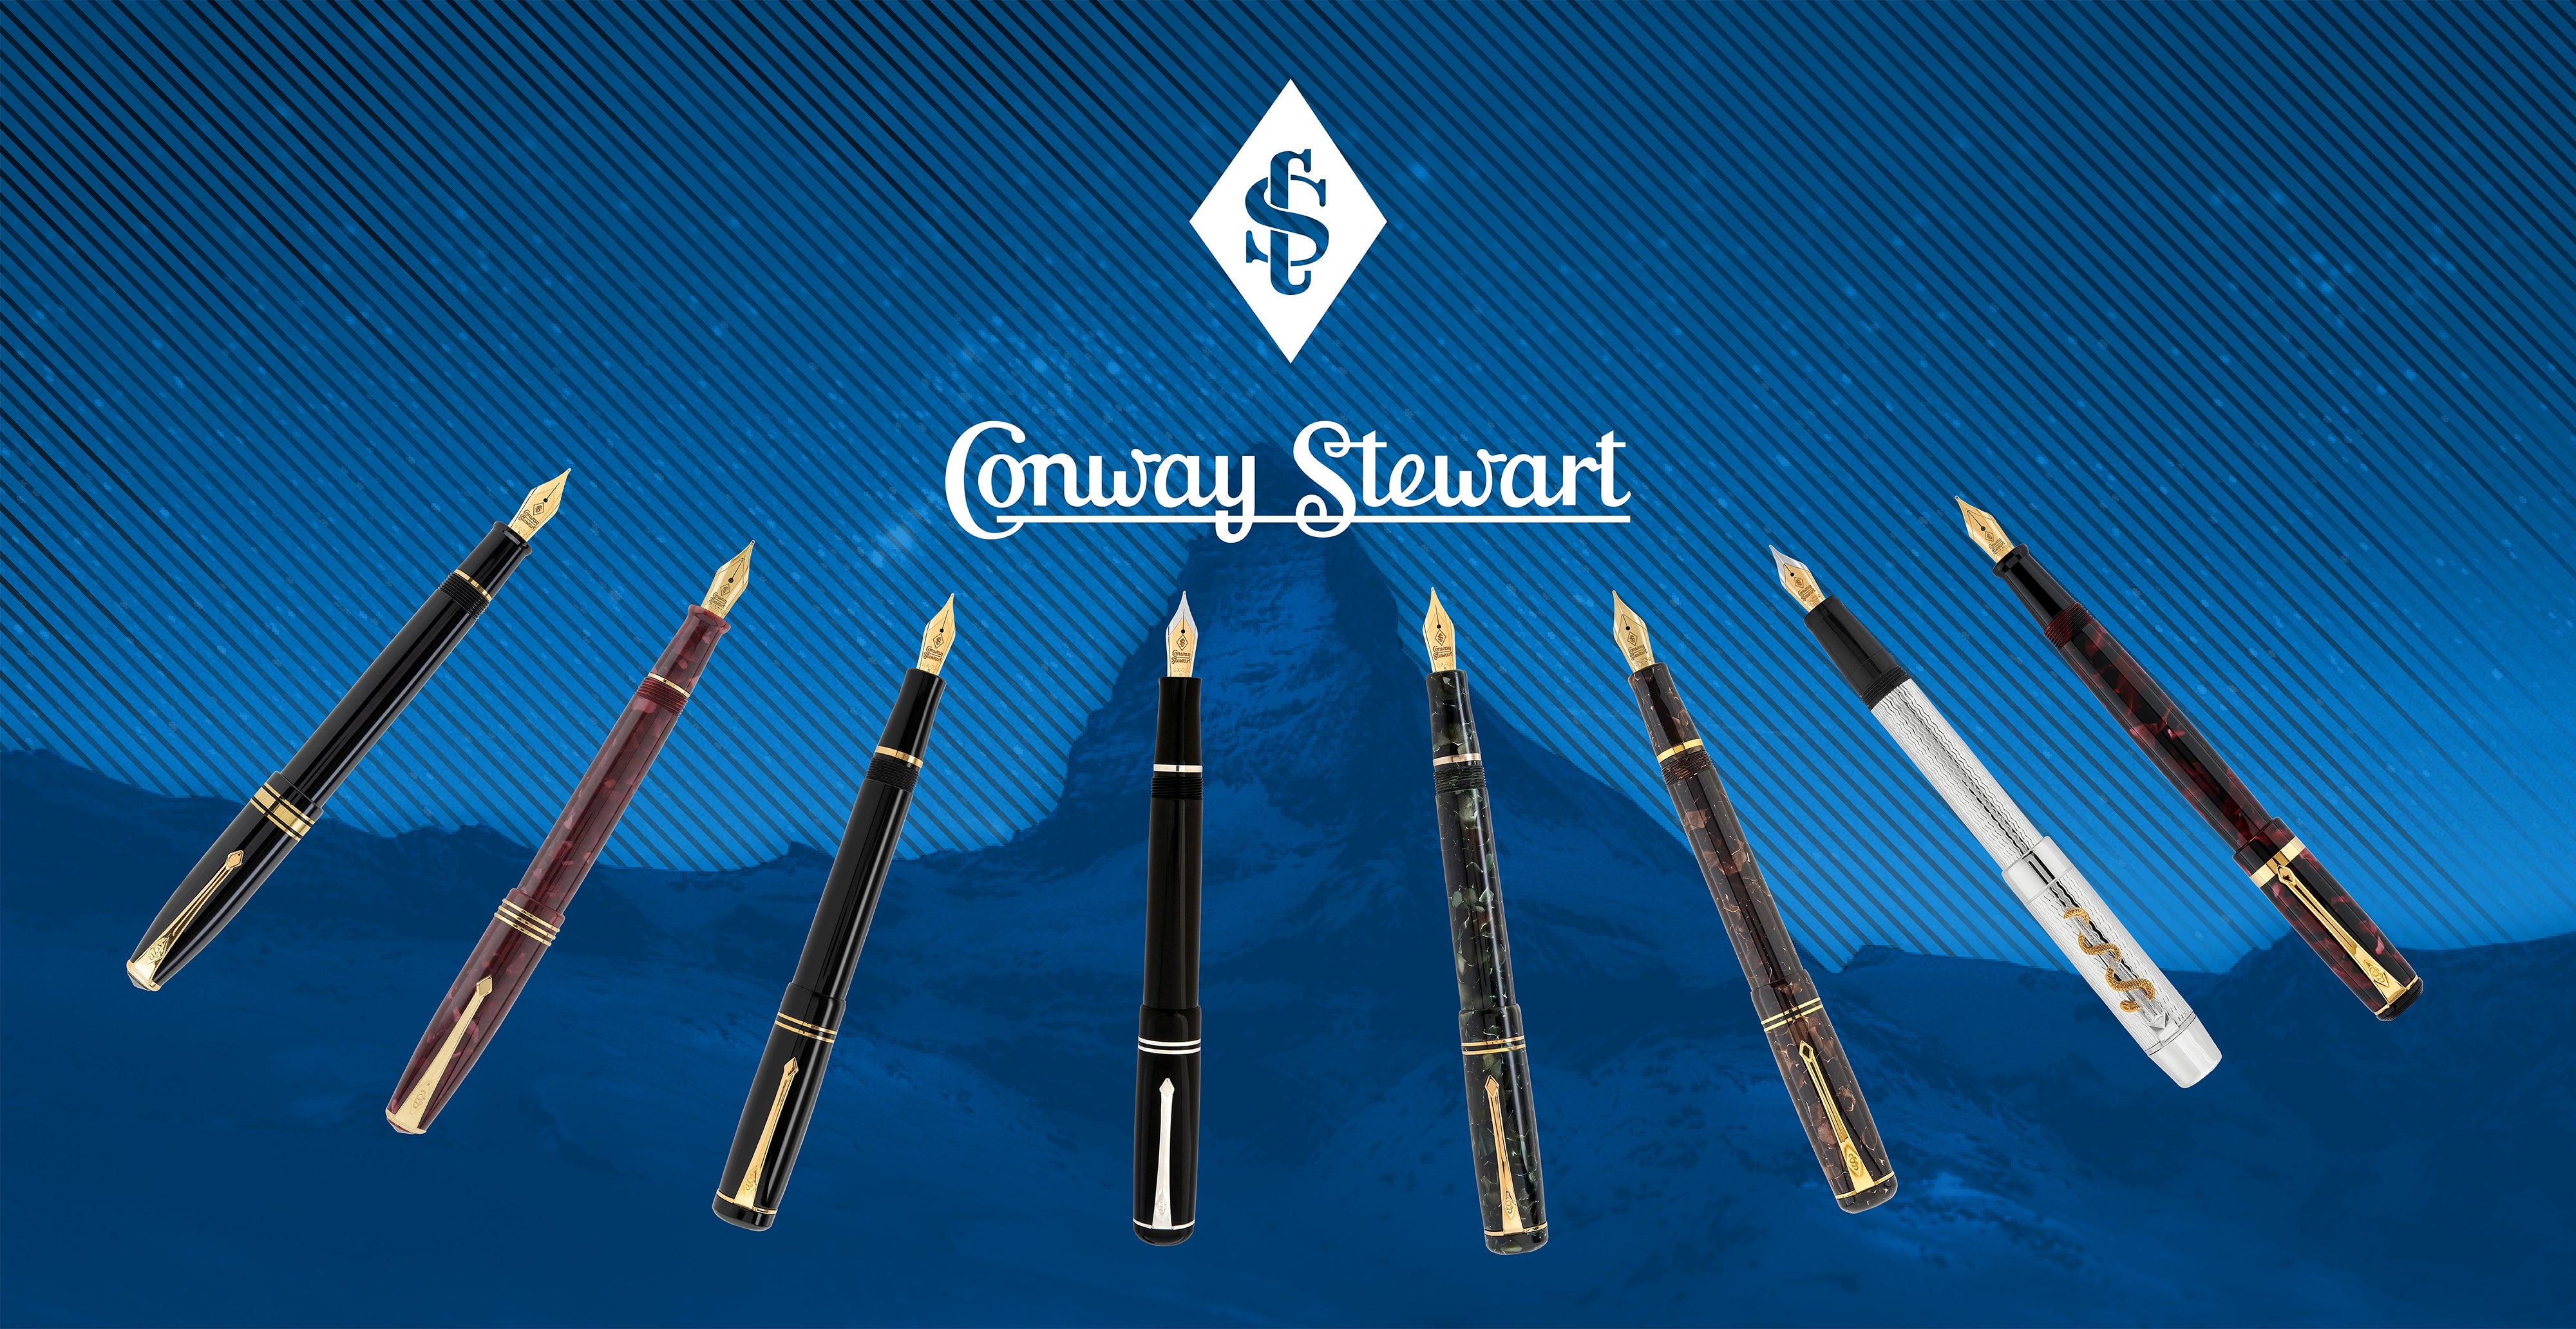 What’s the difference between a extra fine, fine, medium or broad nib – and which one will suit me best?